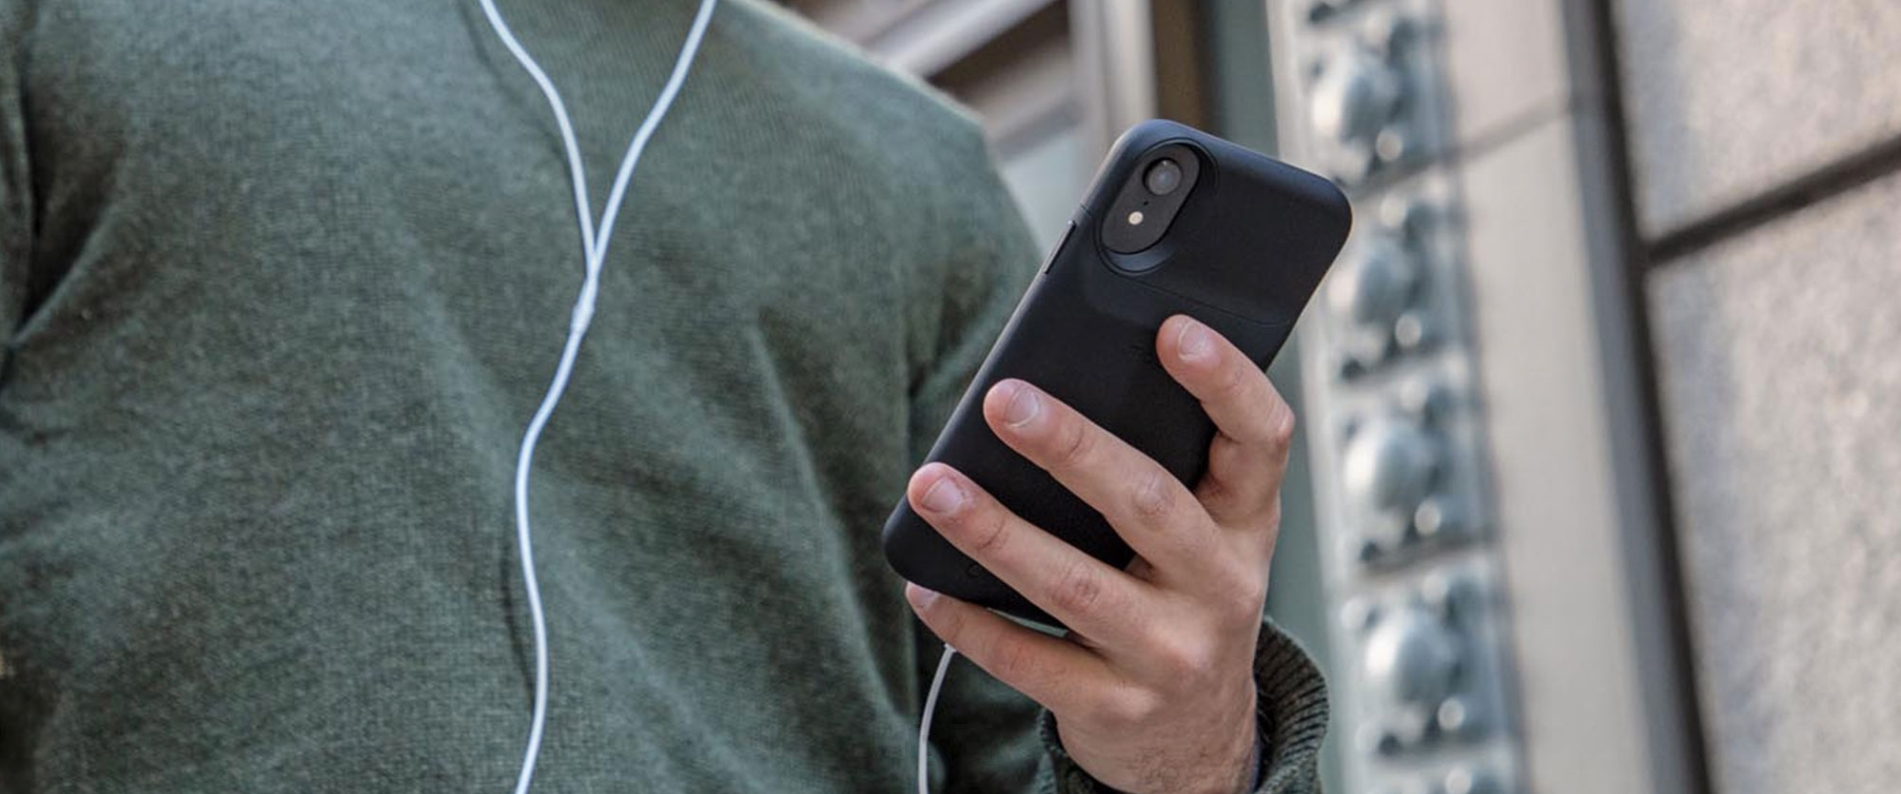 mophie Juice Pack Air Made for iPhone X 